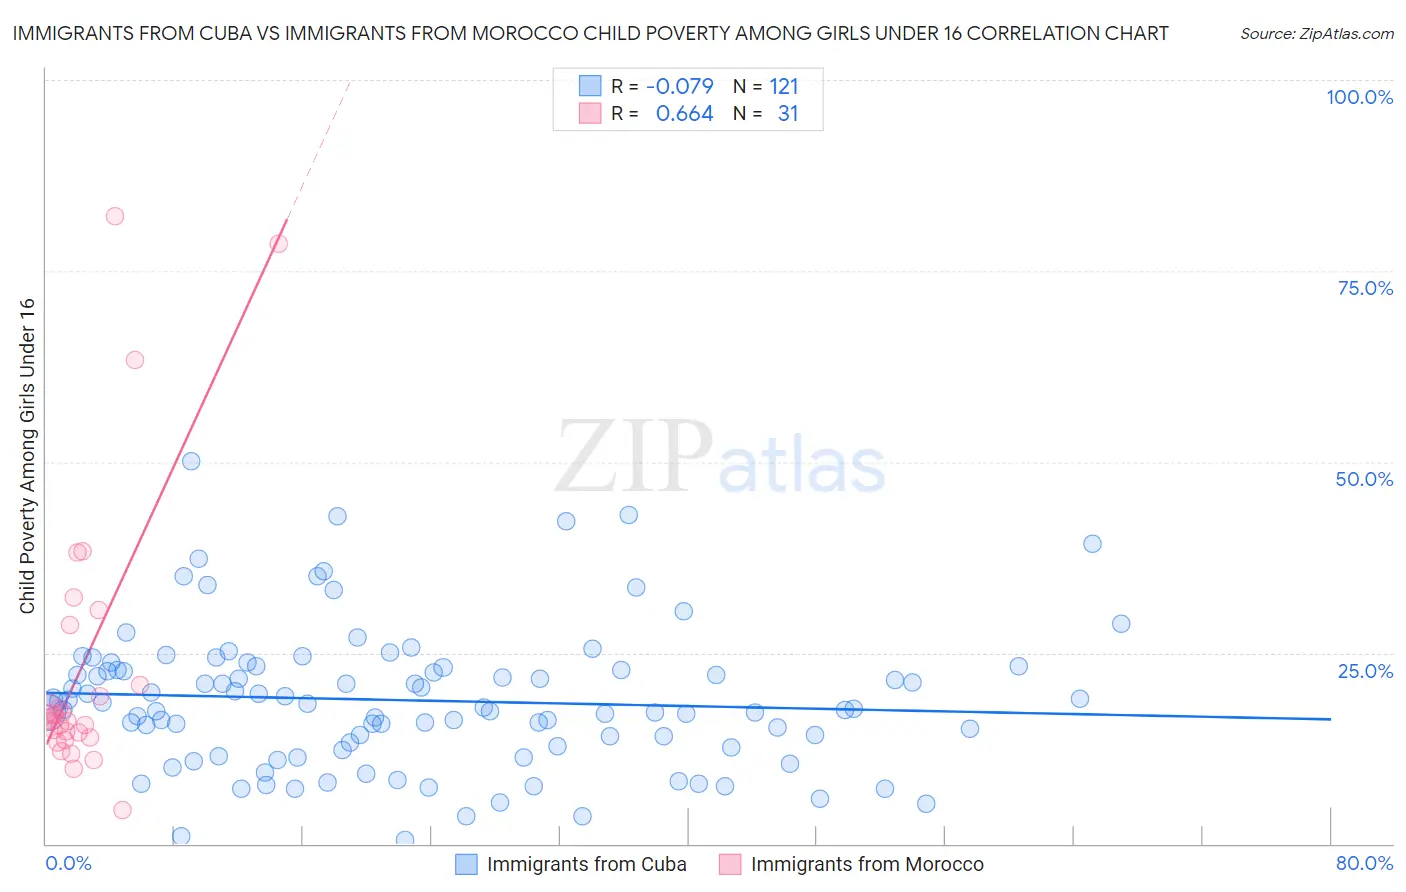 Immigrants from Cuba vs Immigrants from Morocco Child Poverty Among Girls Under 16